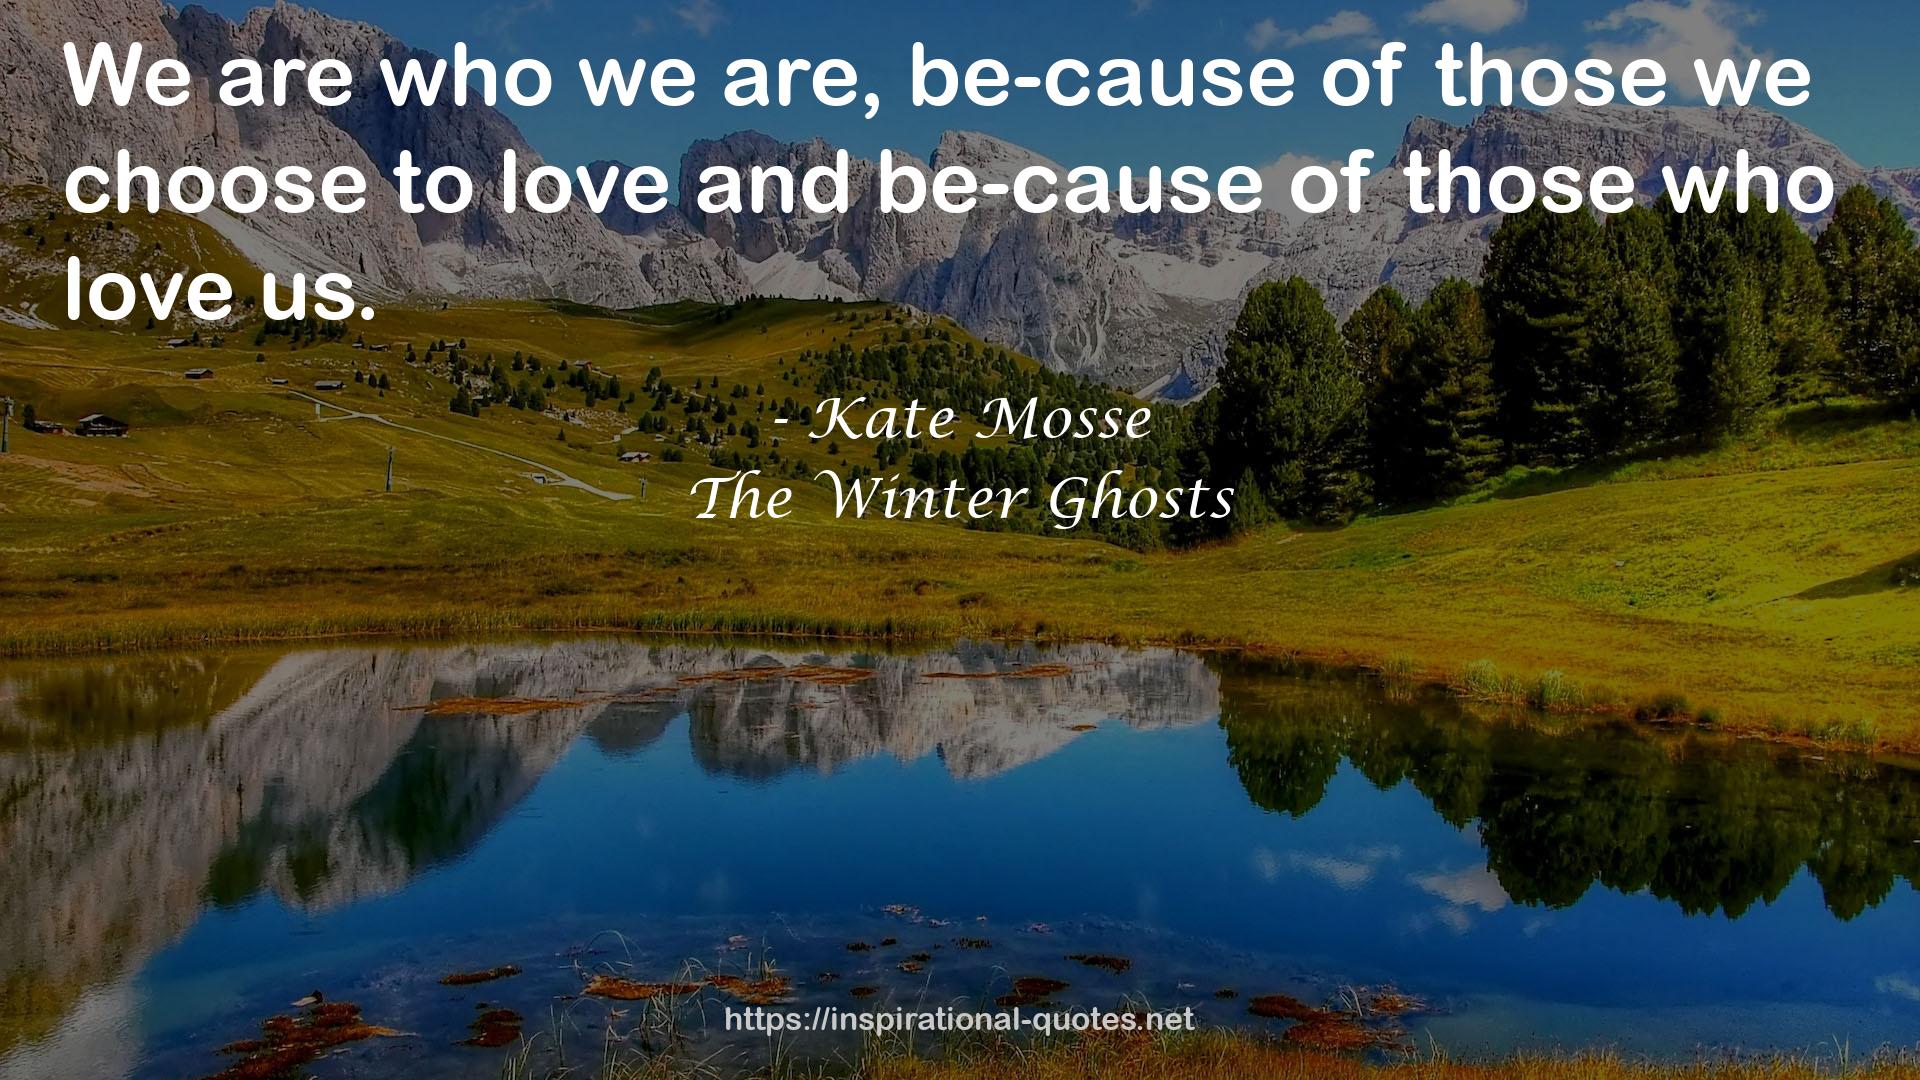 Kate Mosse QUOTES